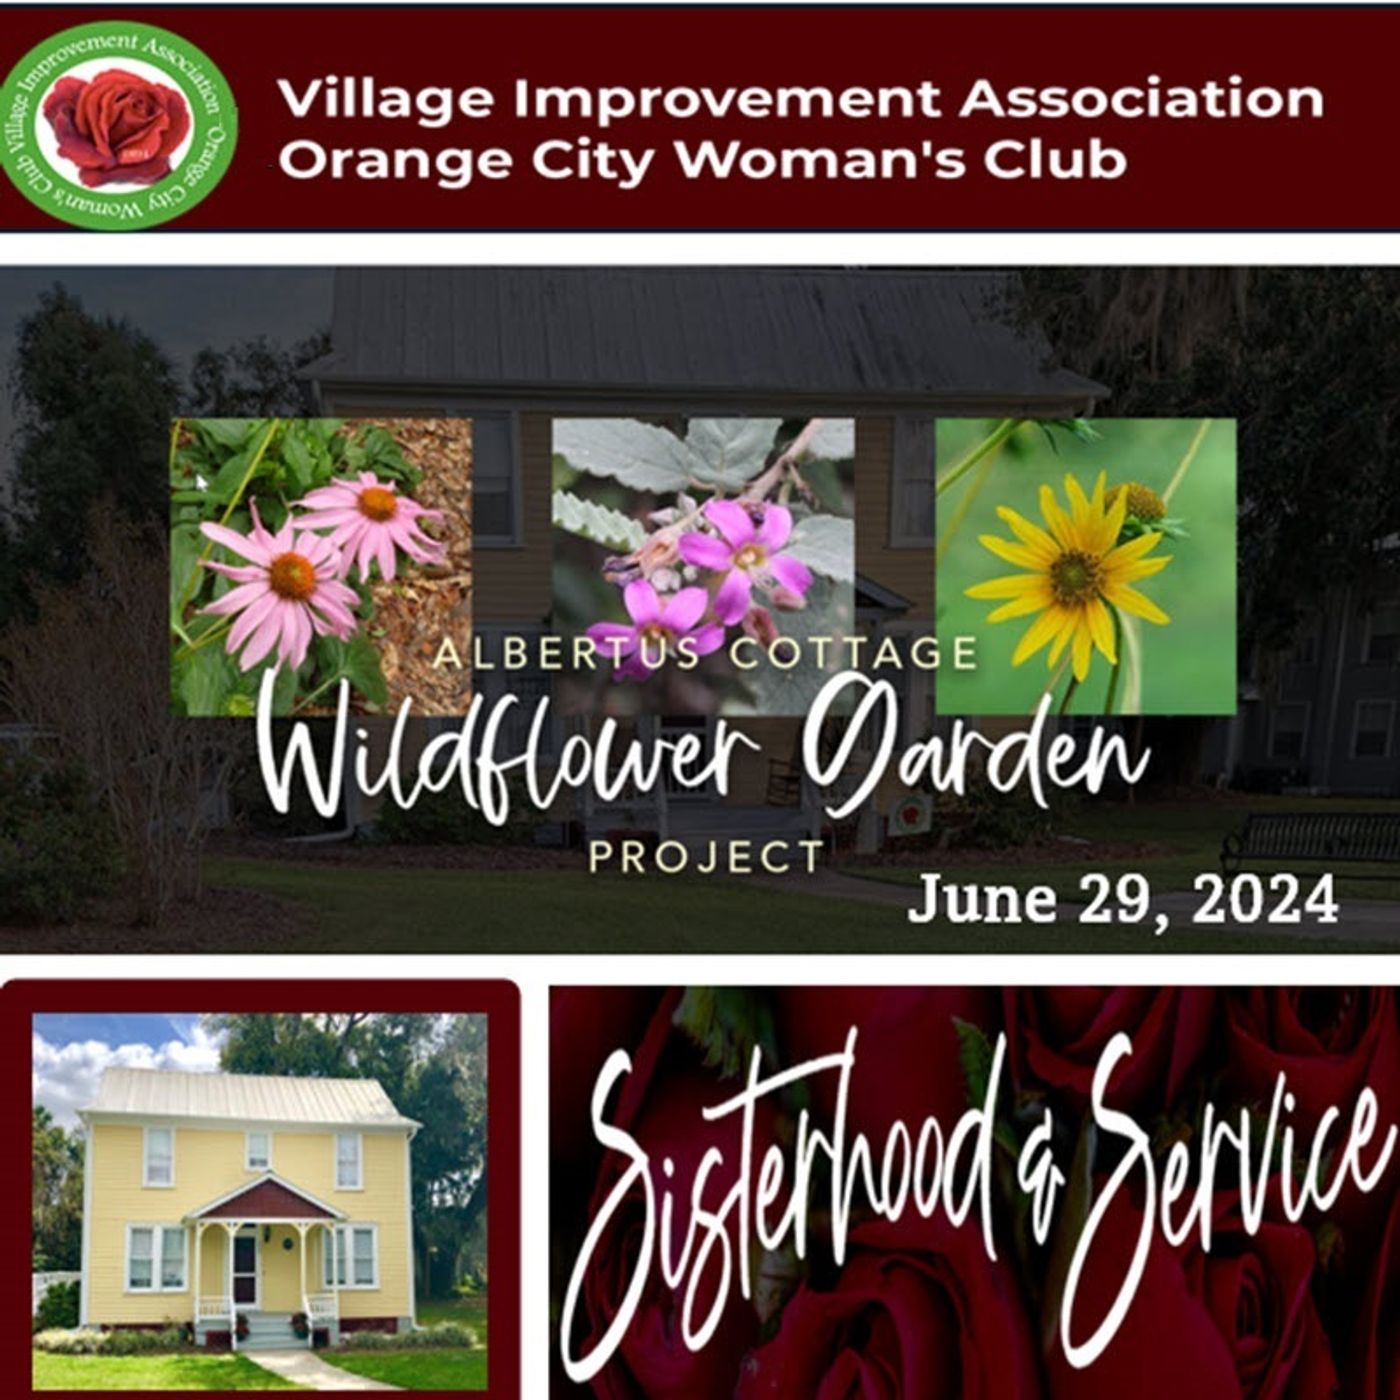 S2 Ep289: Better Lawns and Gardens - Hour 2 Albertus Cottage Sisterhood & Service Project May 18, 2024